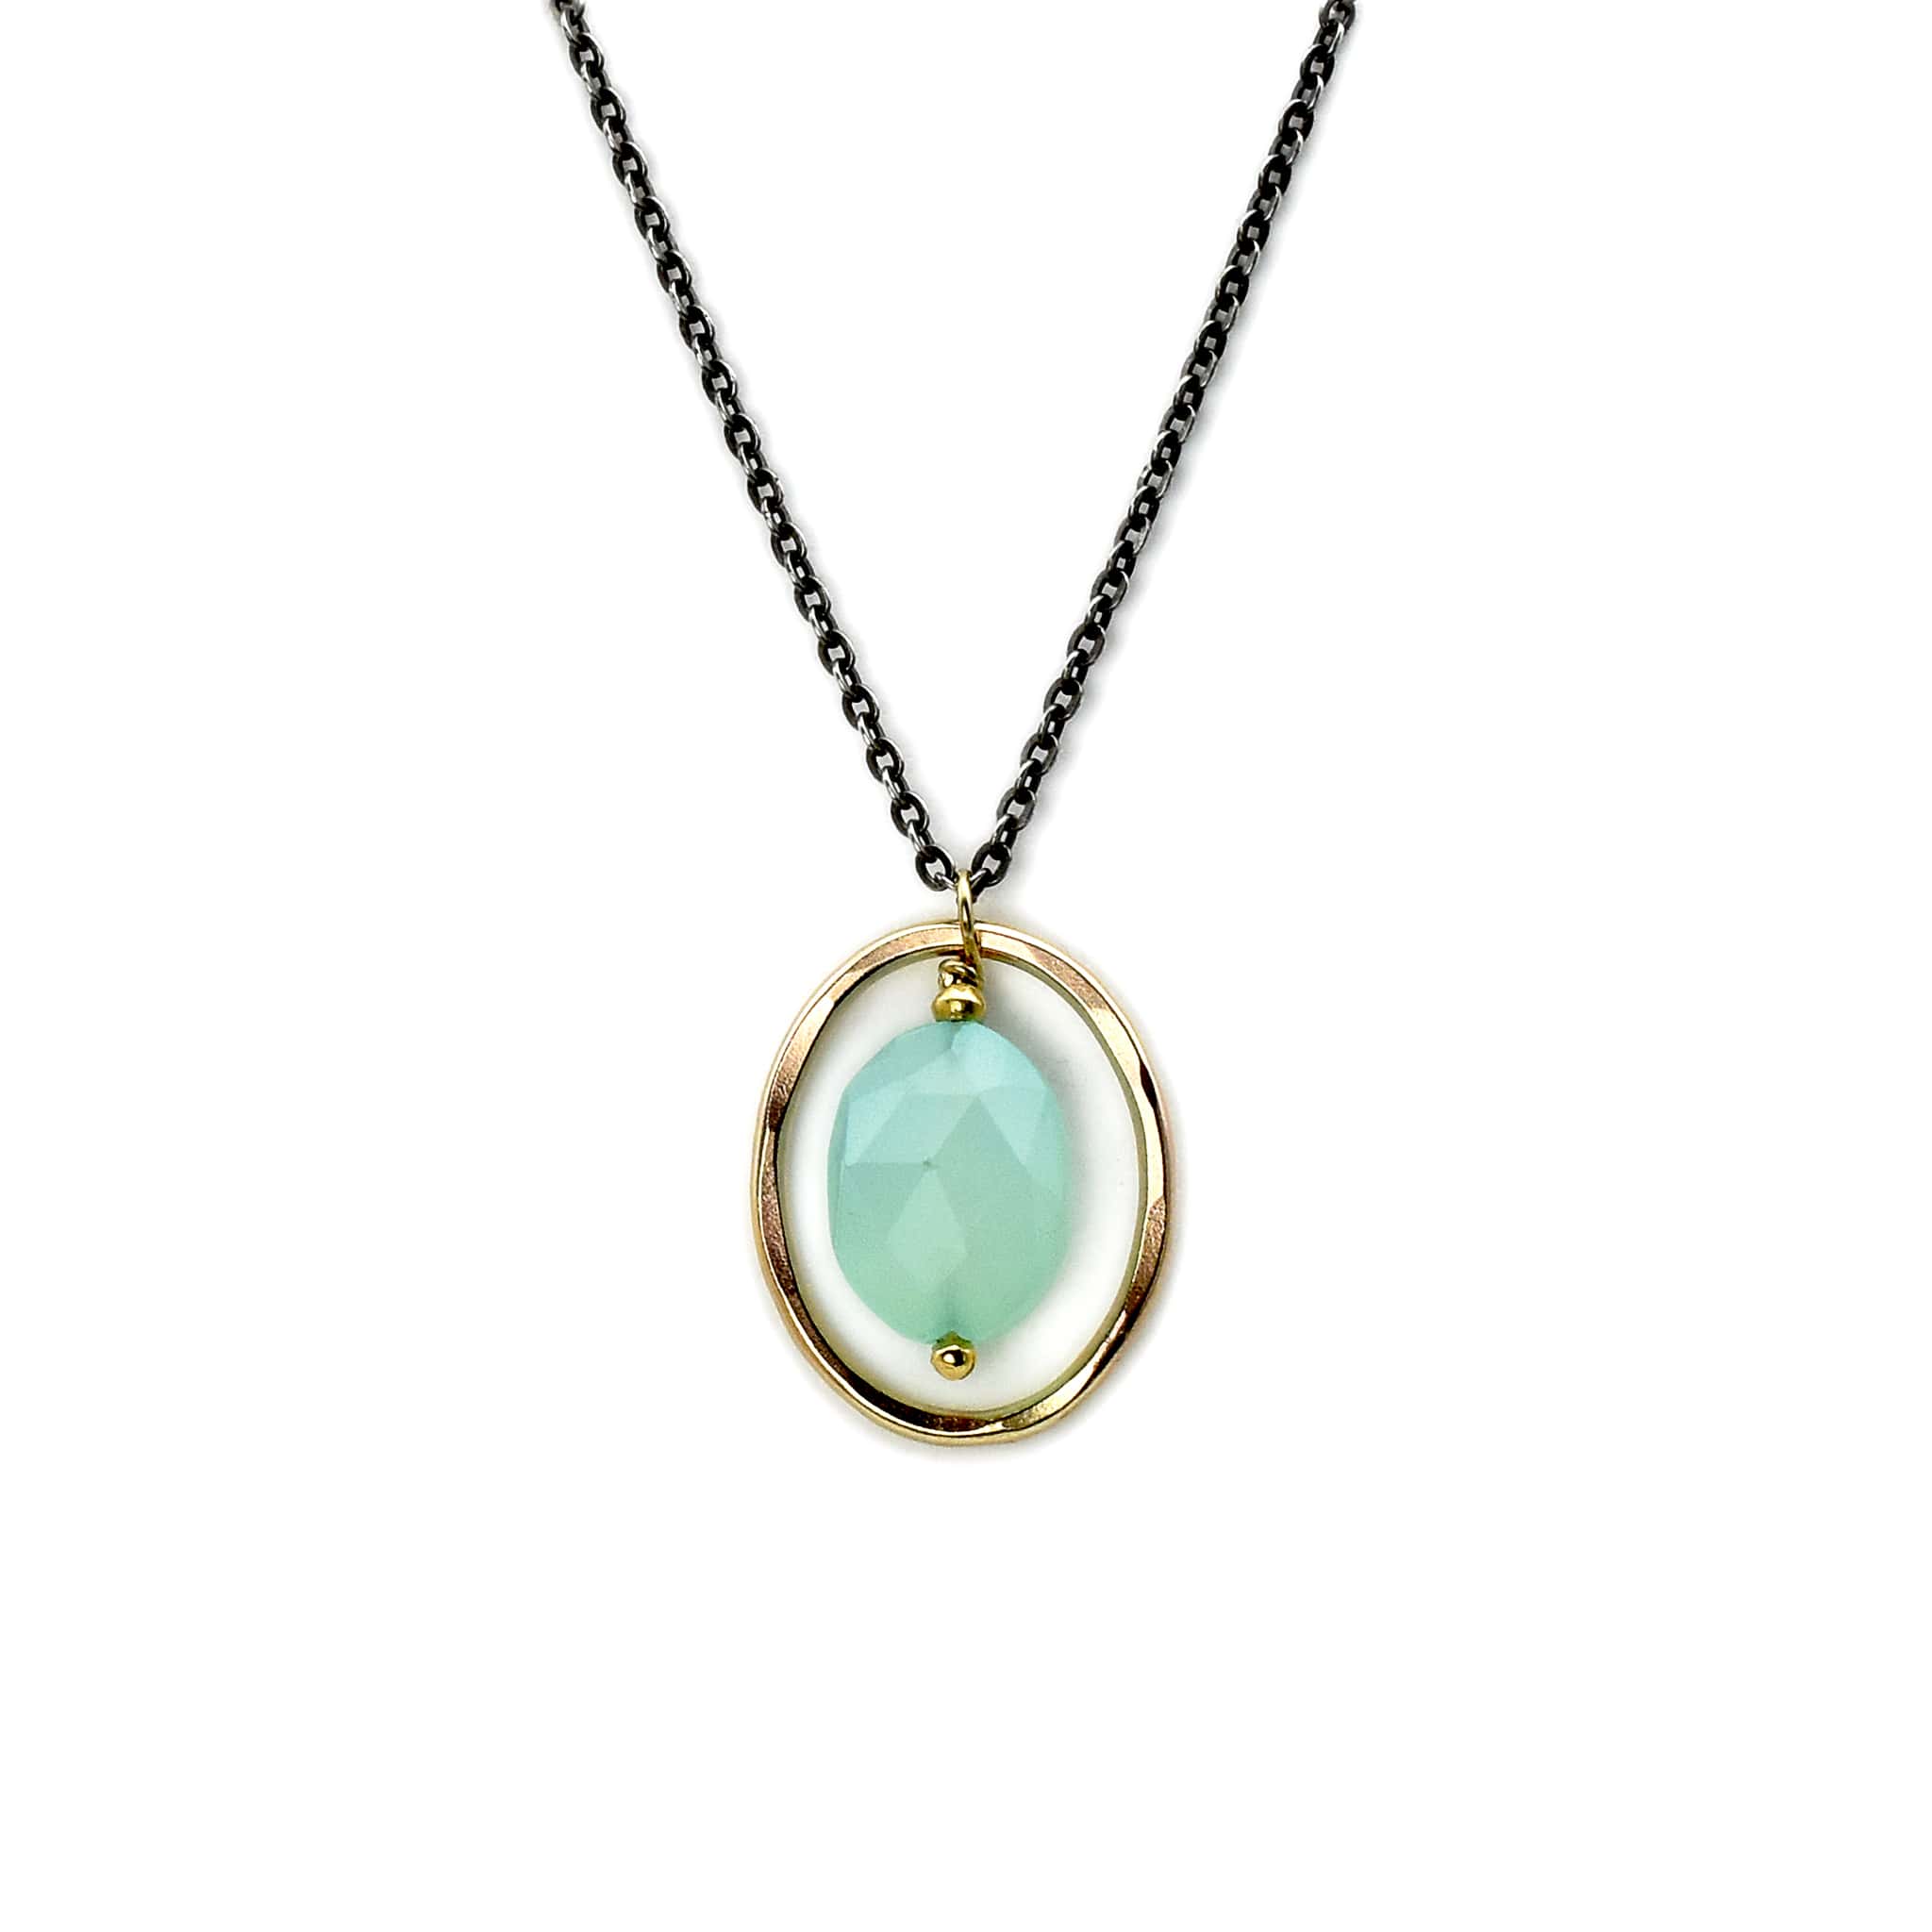 Faceted Oval Aqua Chalcedony Necklace - Necklaces